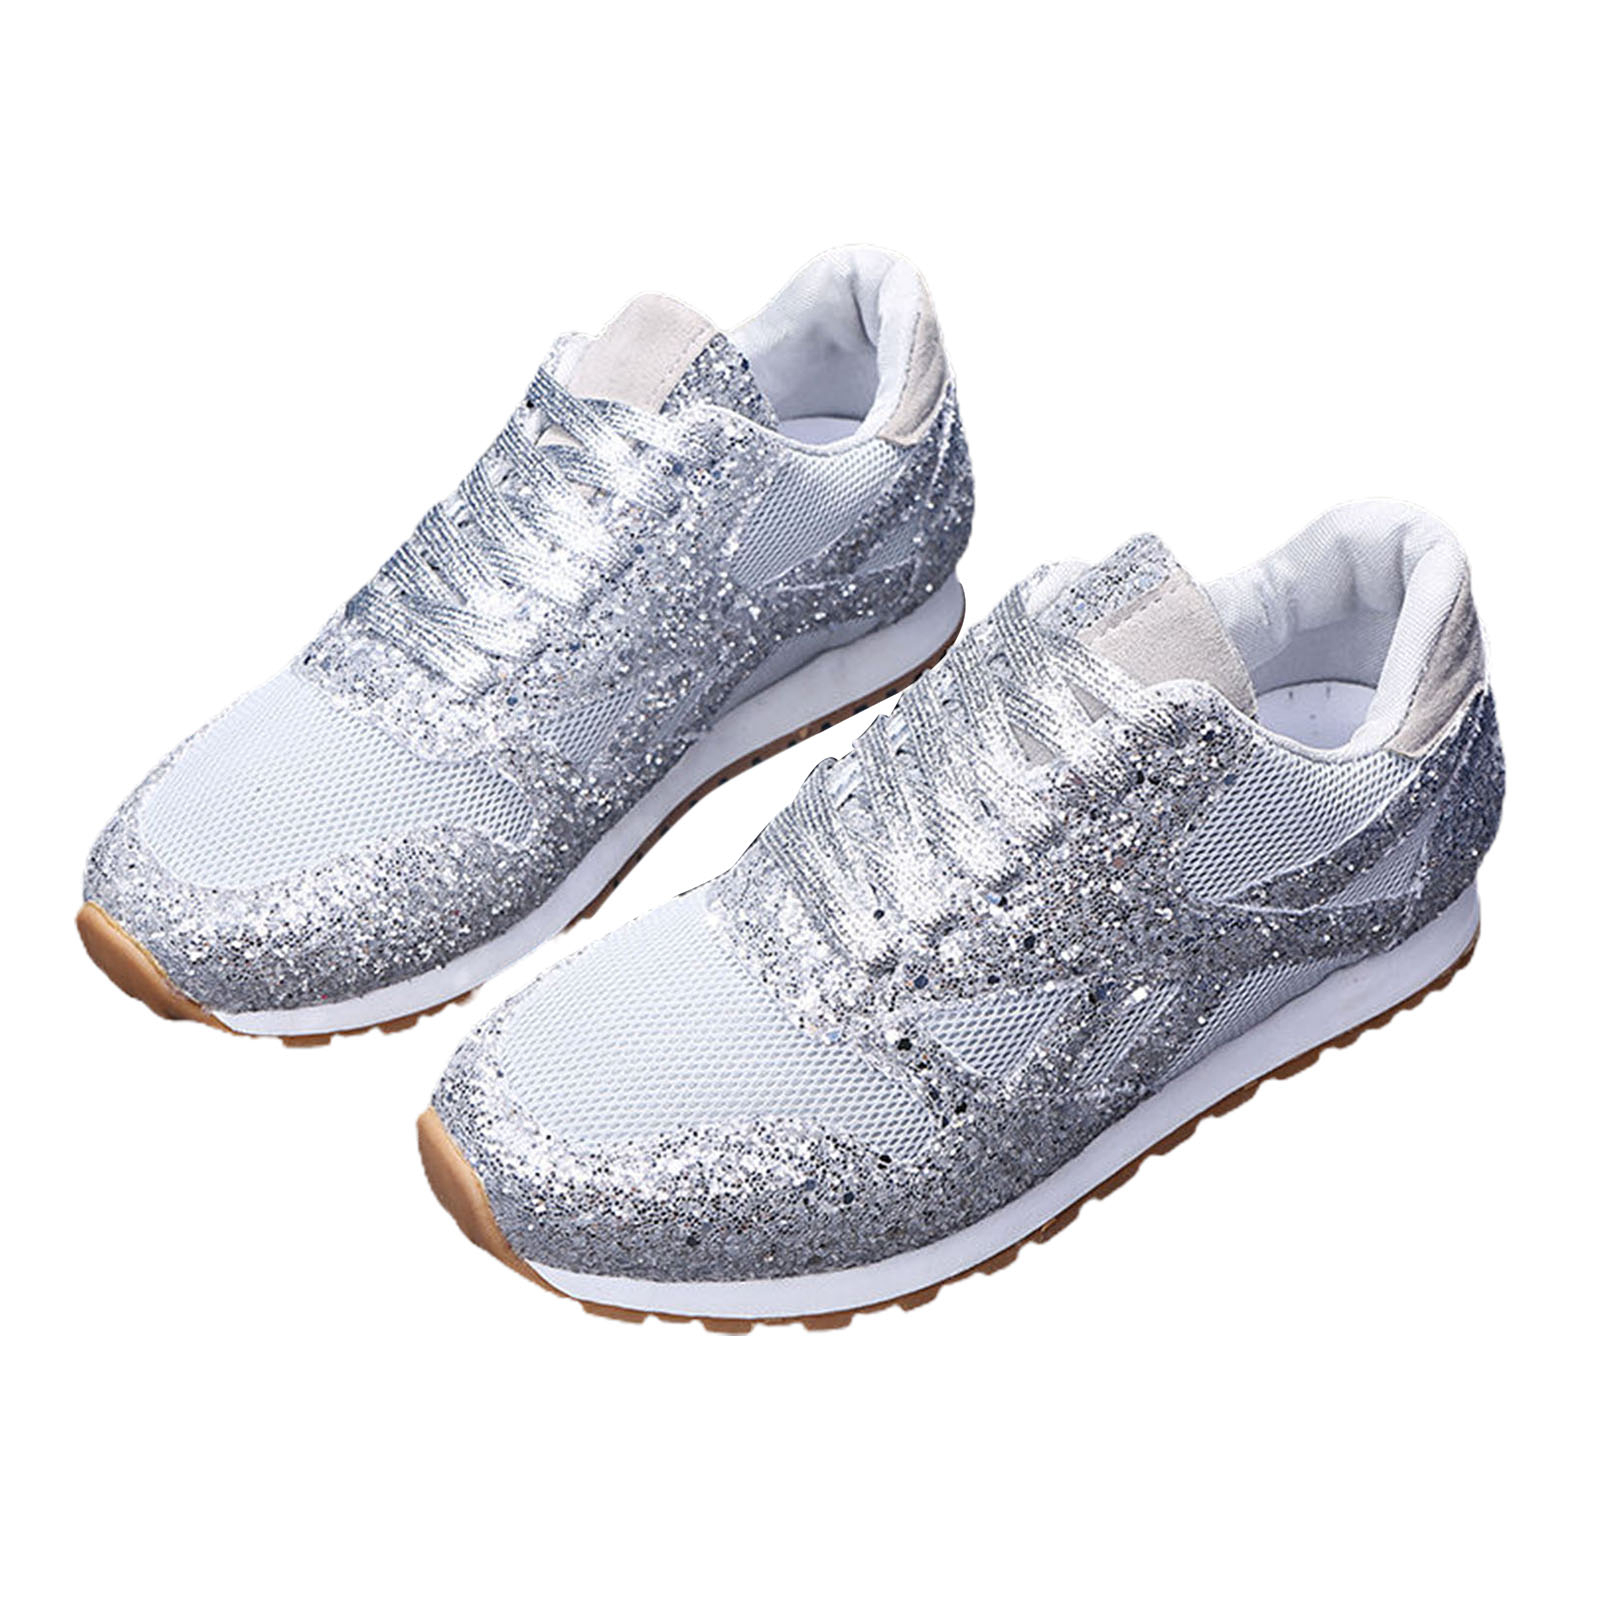 CYBLING Breathable Fashion Low Top Platform Sneakers for Women Outdoor Casual Walking Shoes